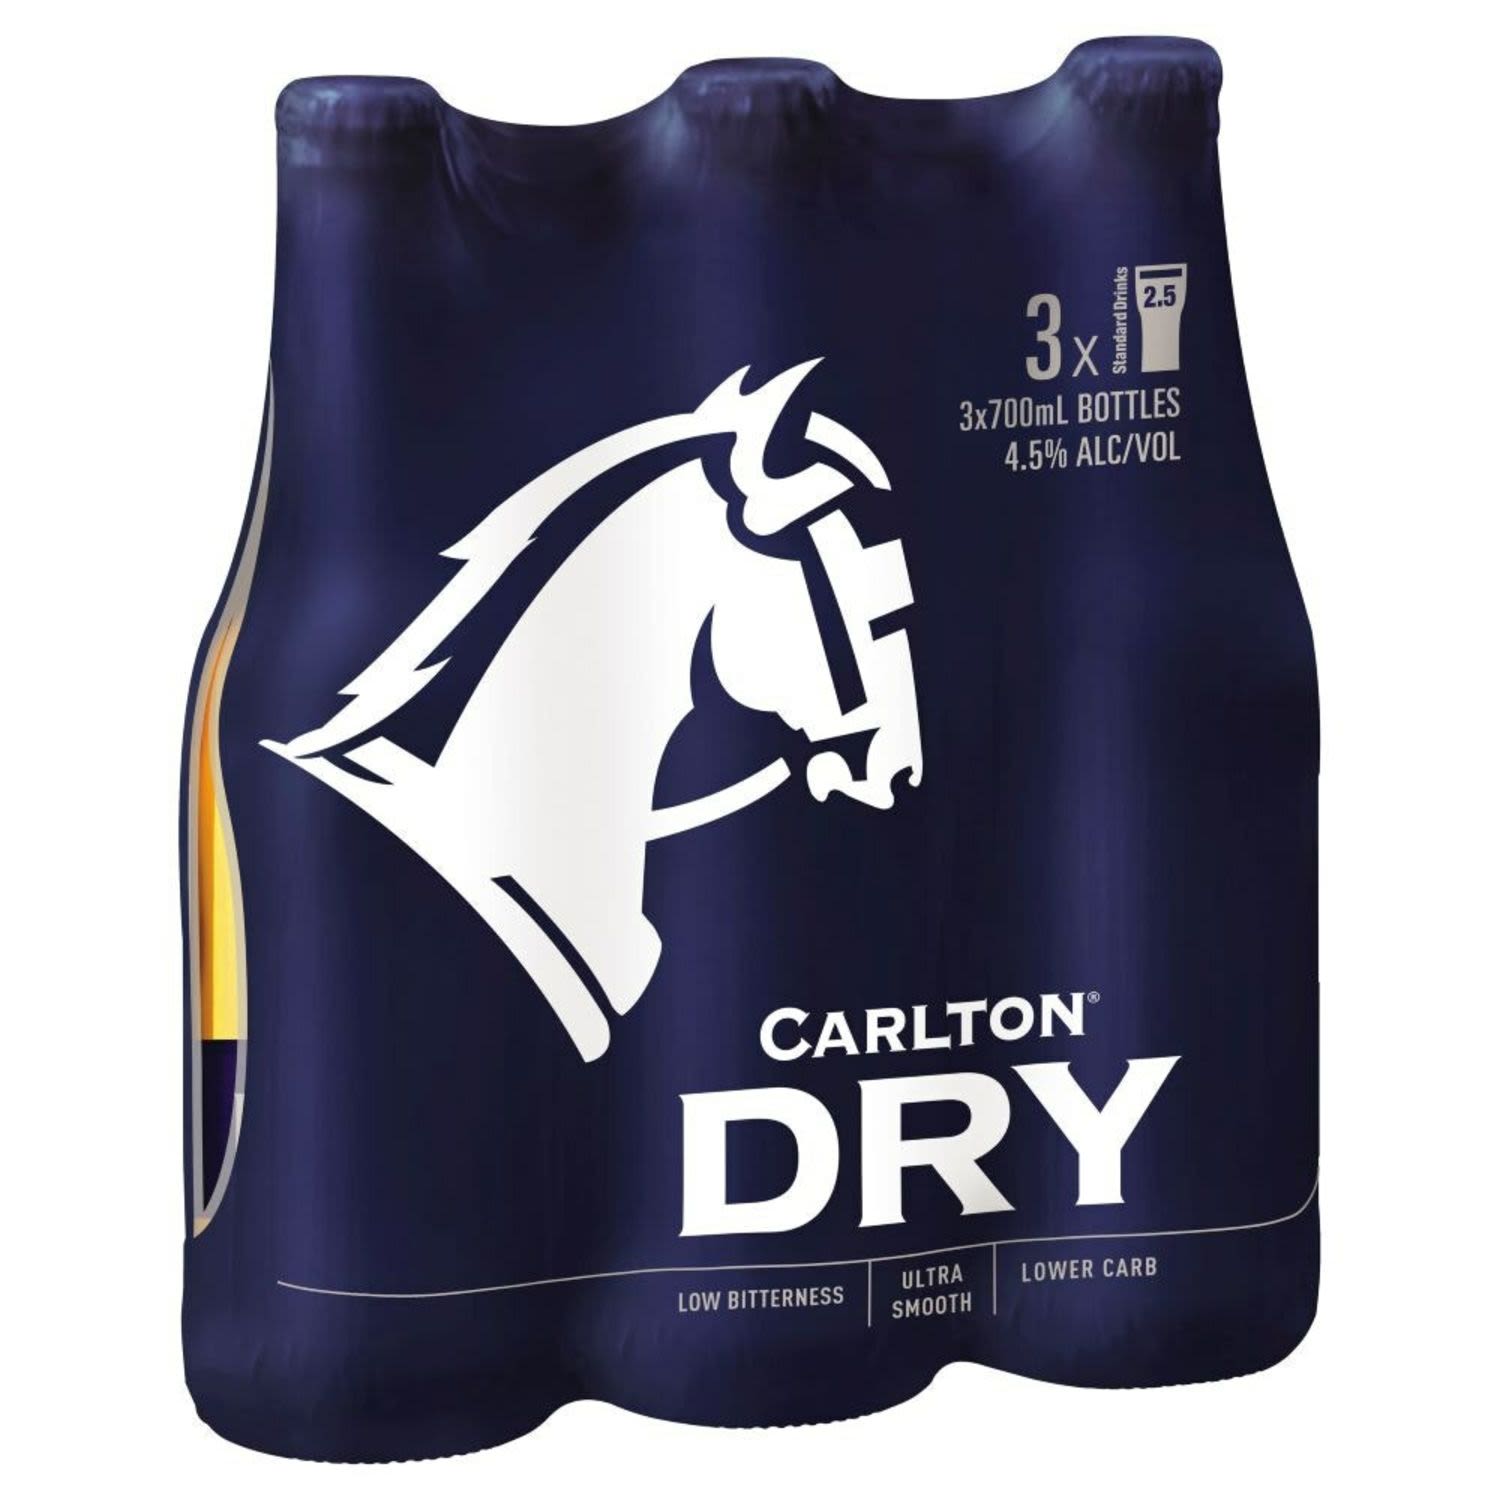 Carlton Dry's extended brewing process removes excess sugars creating a smooth, crisp finish with lower carbohydrates than a full strength beer. A clean, crisp and incredibly refreshing lager that is perfect drinking in the summer sunshine or equally good at home.<br /> <br />Alcohol Volume: 4.50%<br /><br />Pack Format: 3 Pack<br /><br />Standard Drinks: 2.5<br /><br />Pack Type: Bottle<br /><br />Country of Origin: Australia<br />